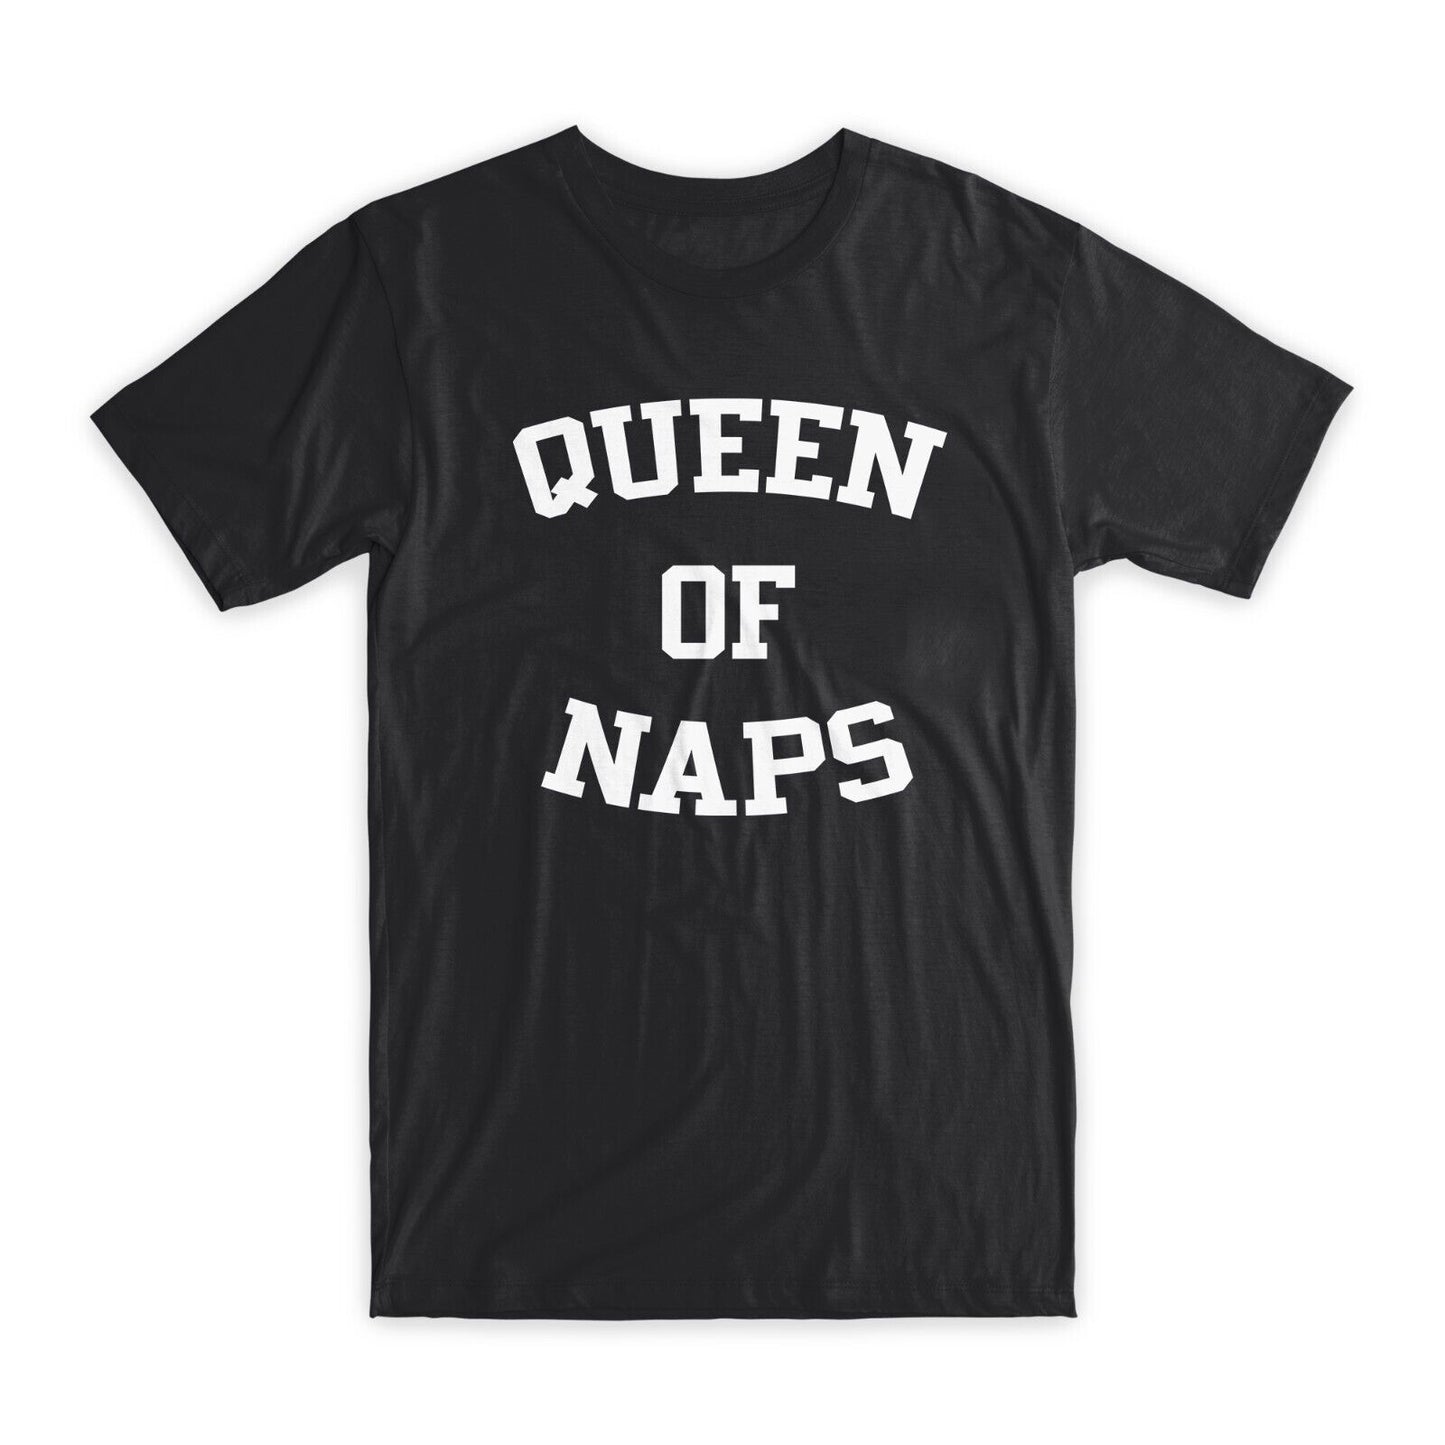 Queen of Naps T-Shirt Premium Soft Cotton Crew Neck Funny Tees Novelty Gifts NEW